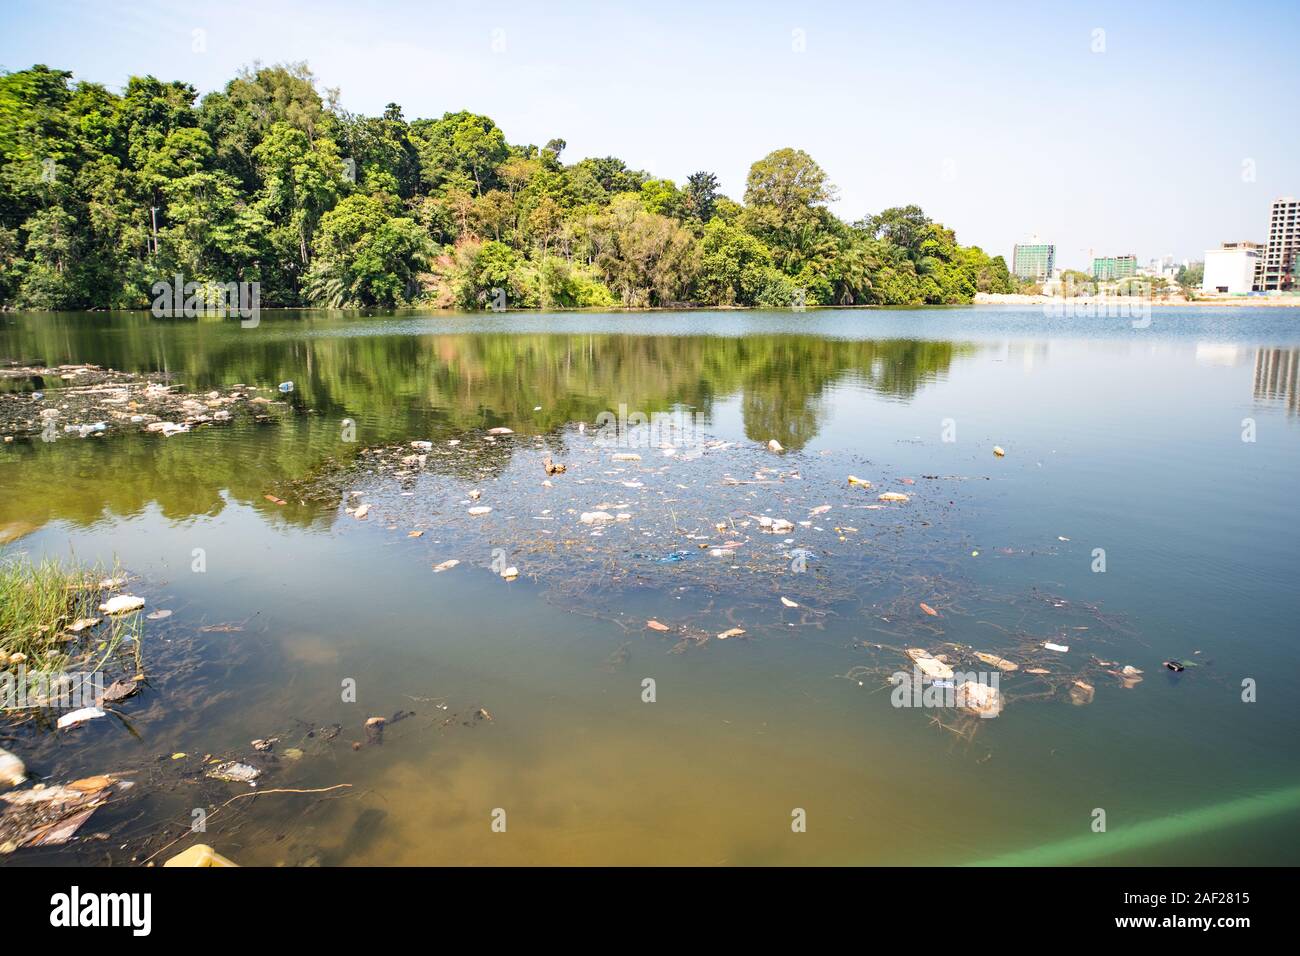 City dump in the pond in the Park. Garbage lies in the water on one of the urban landscape. plastic bottles were thrown into the water. Stock Photo